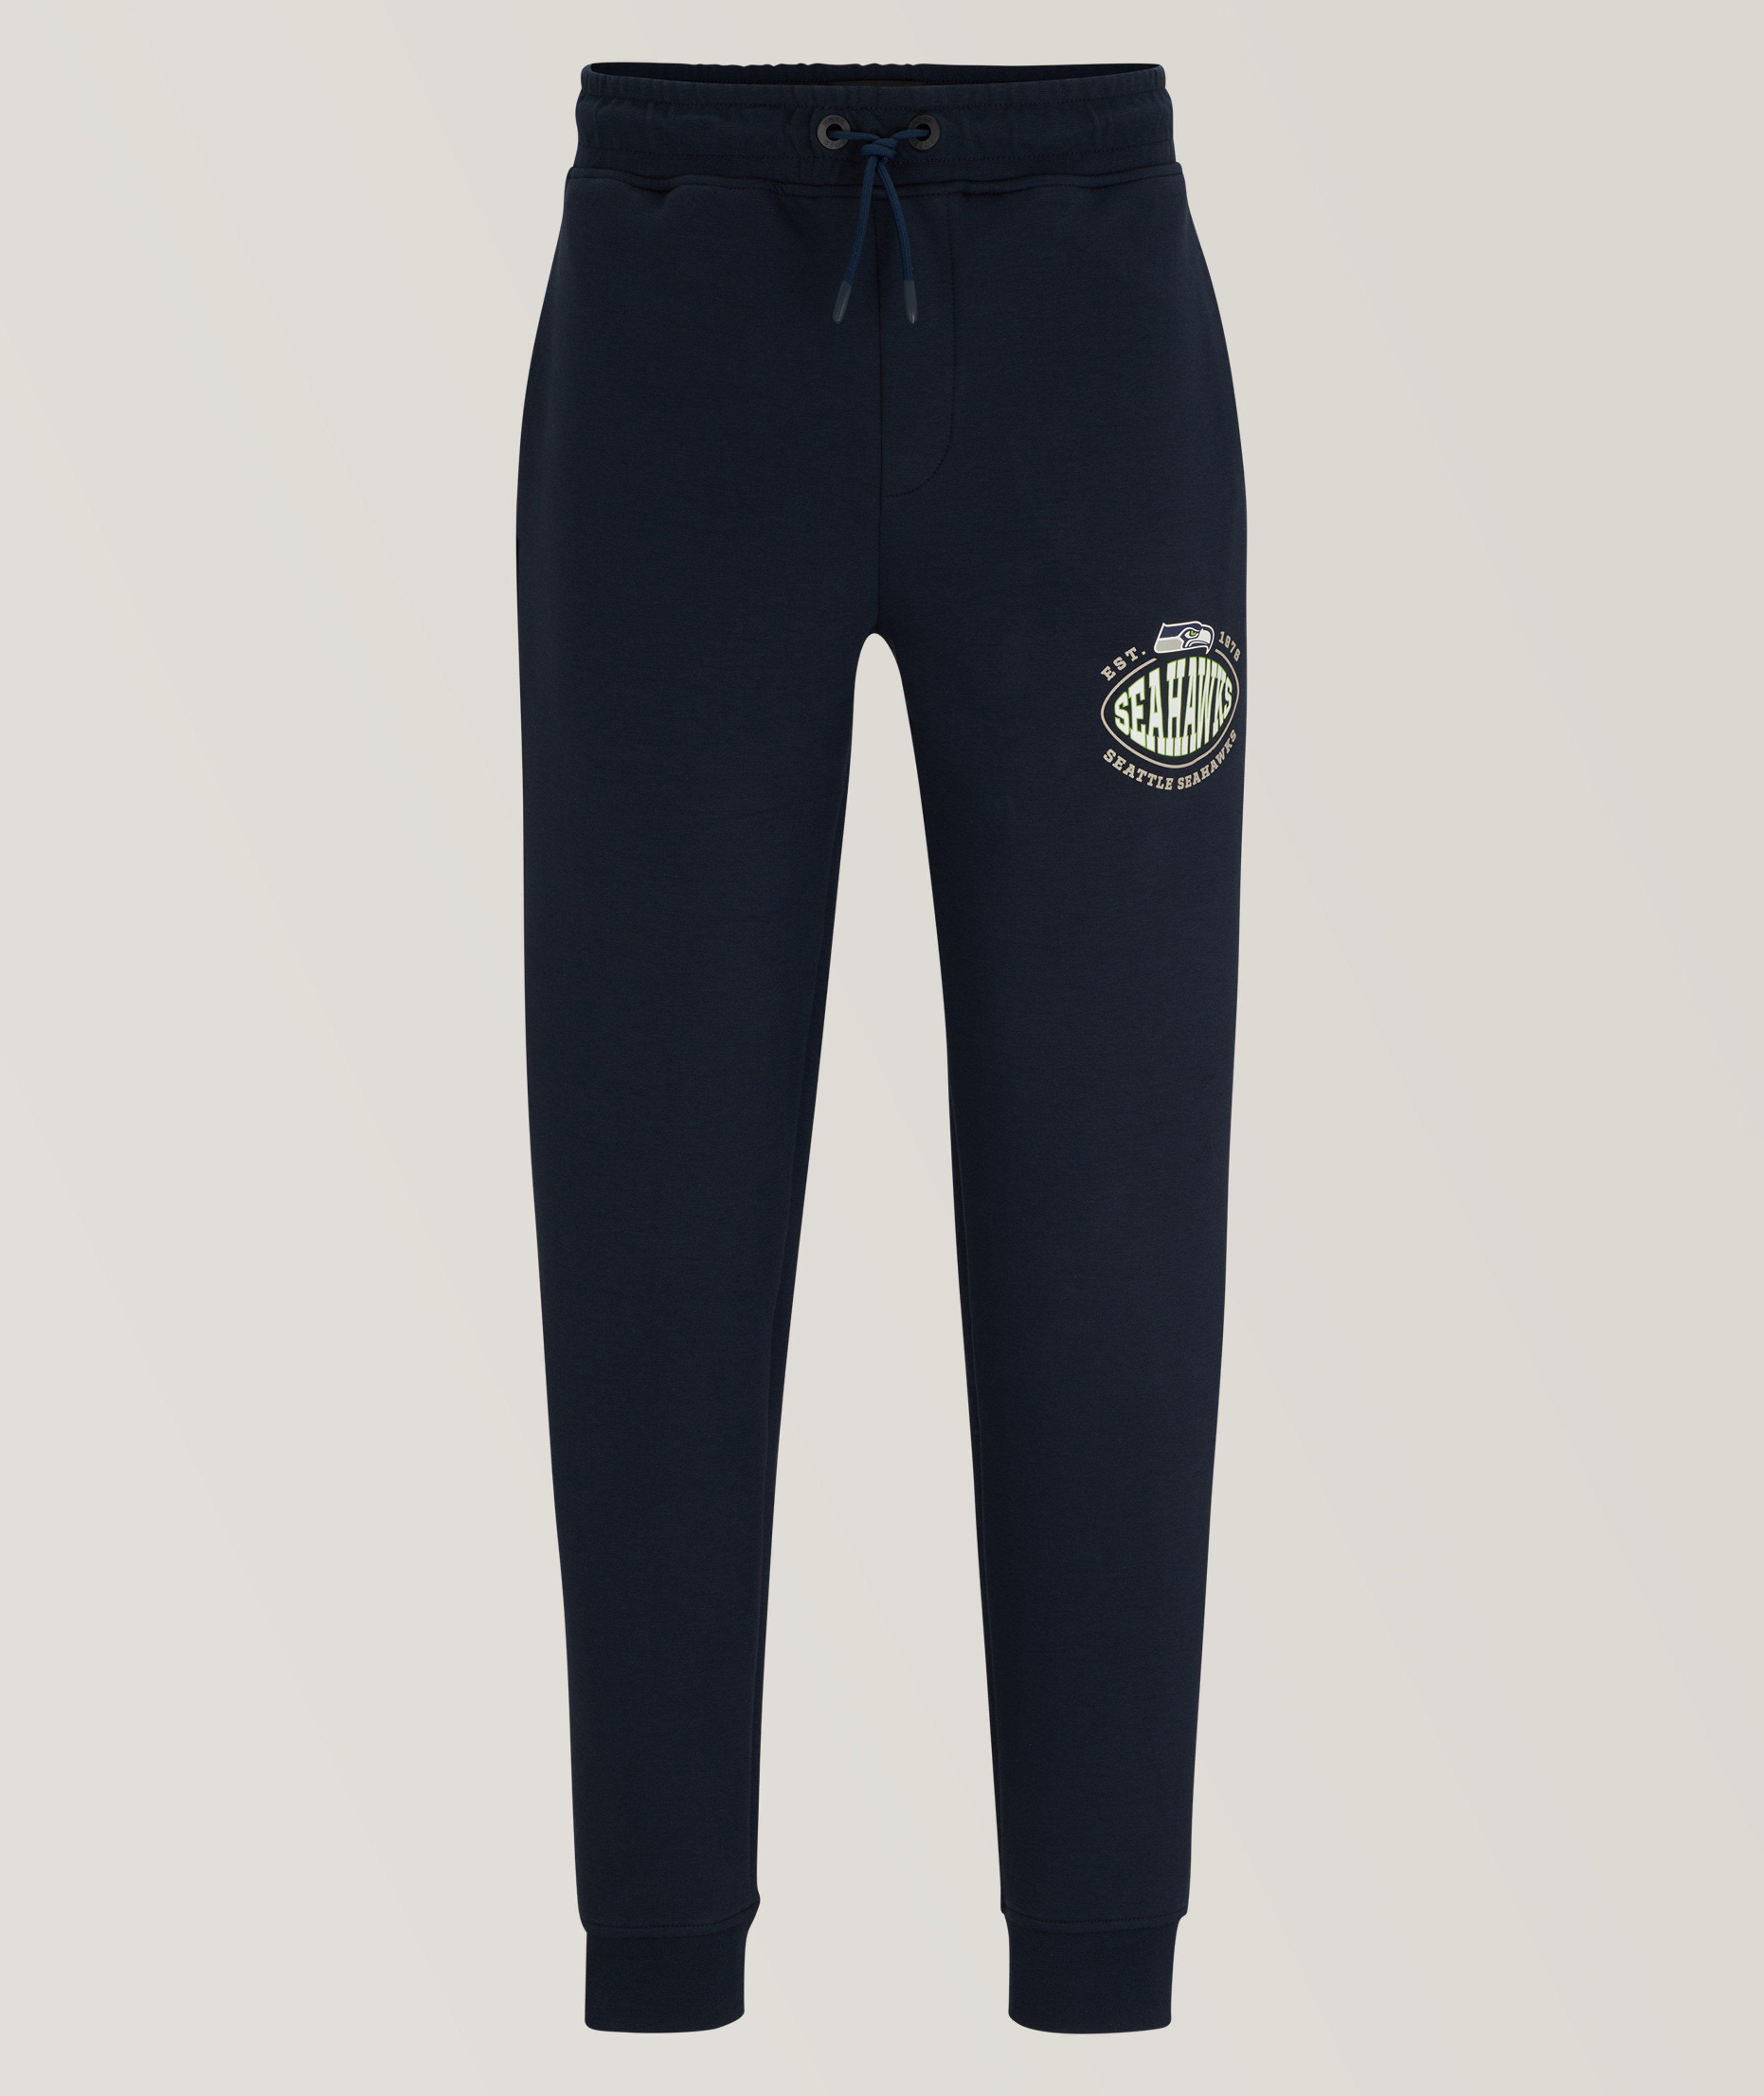 NFL Collection Seattle Seahawks Trackpants  image 0